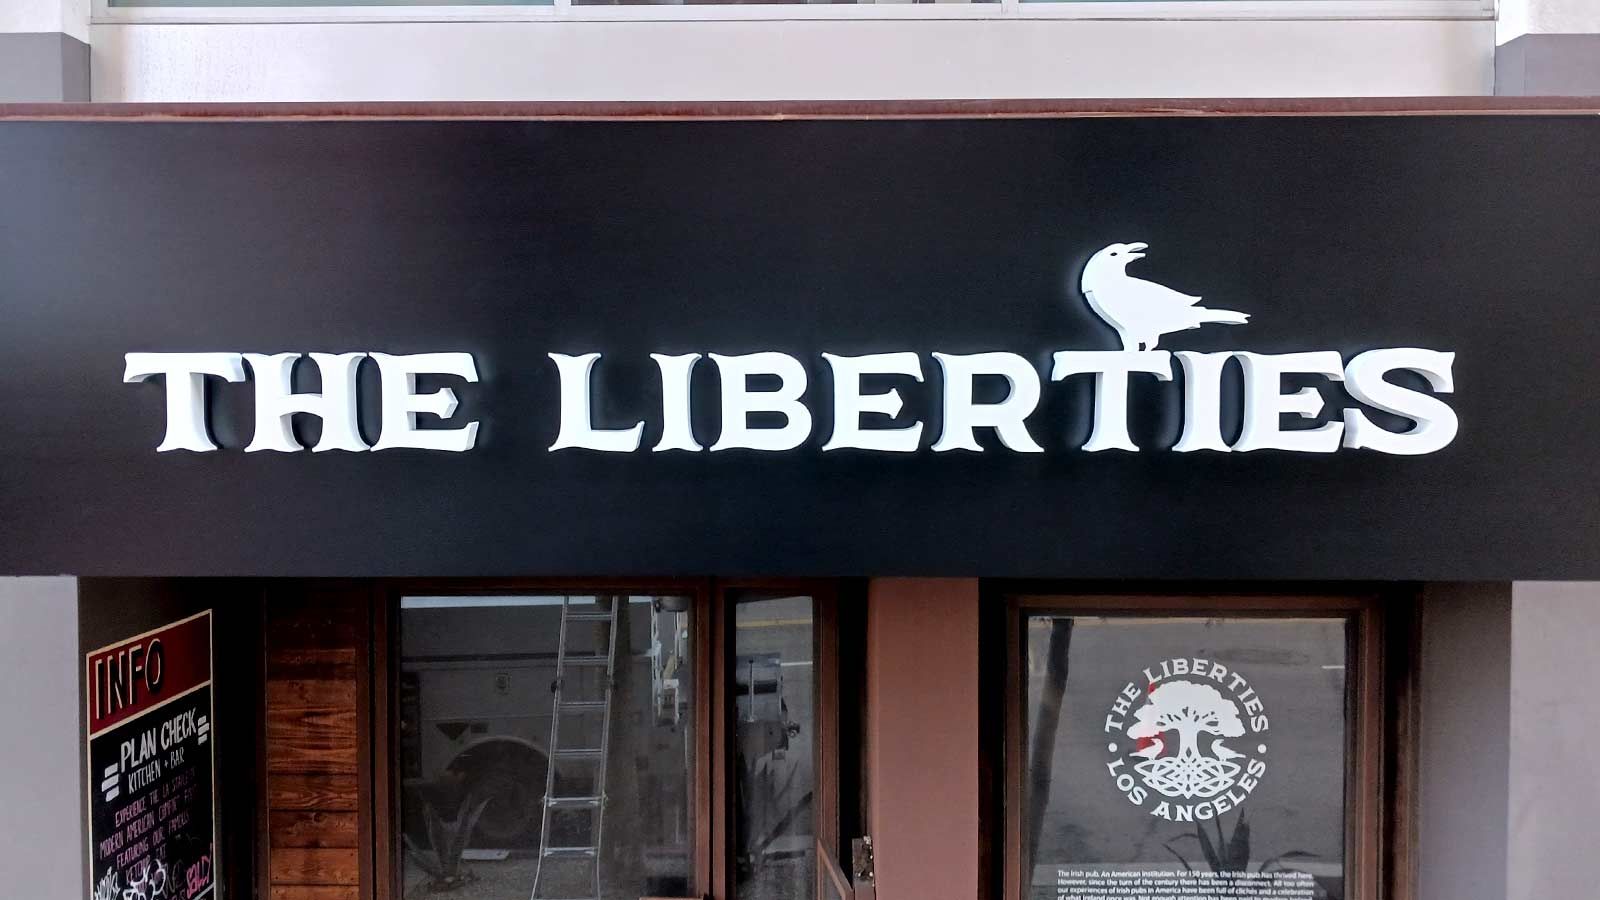 The Liberties reverse channel letters installed outdoors